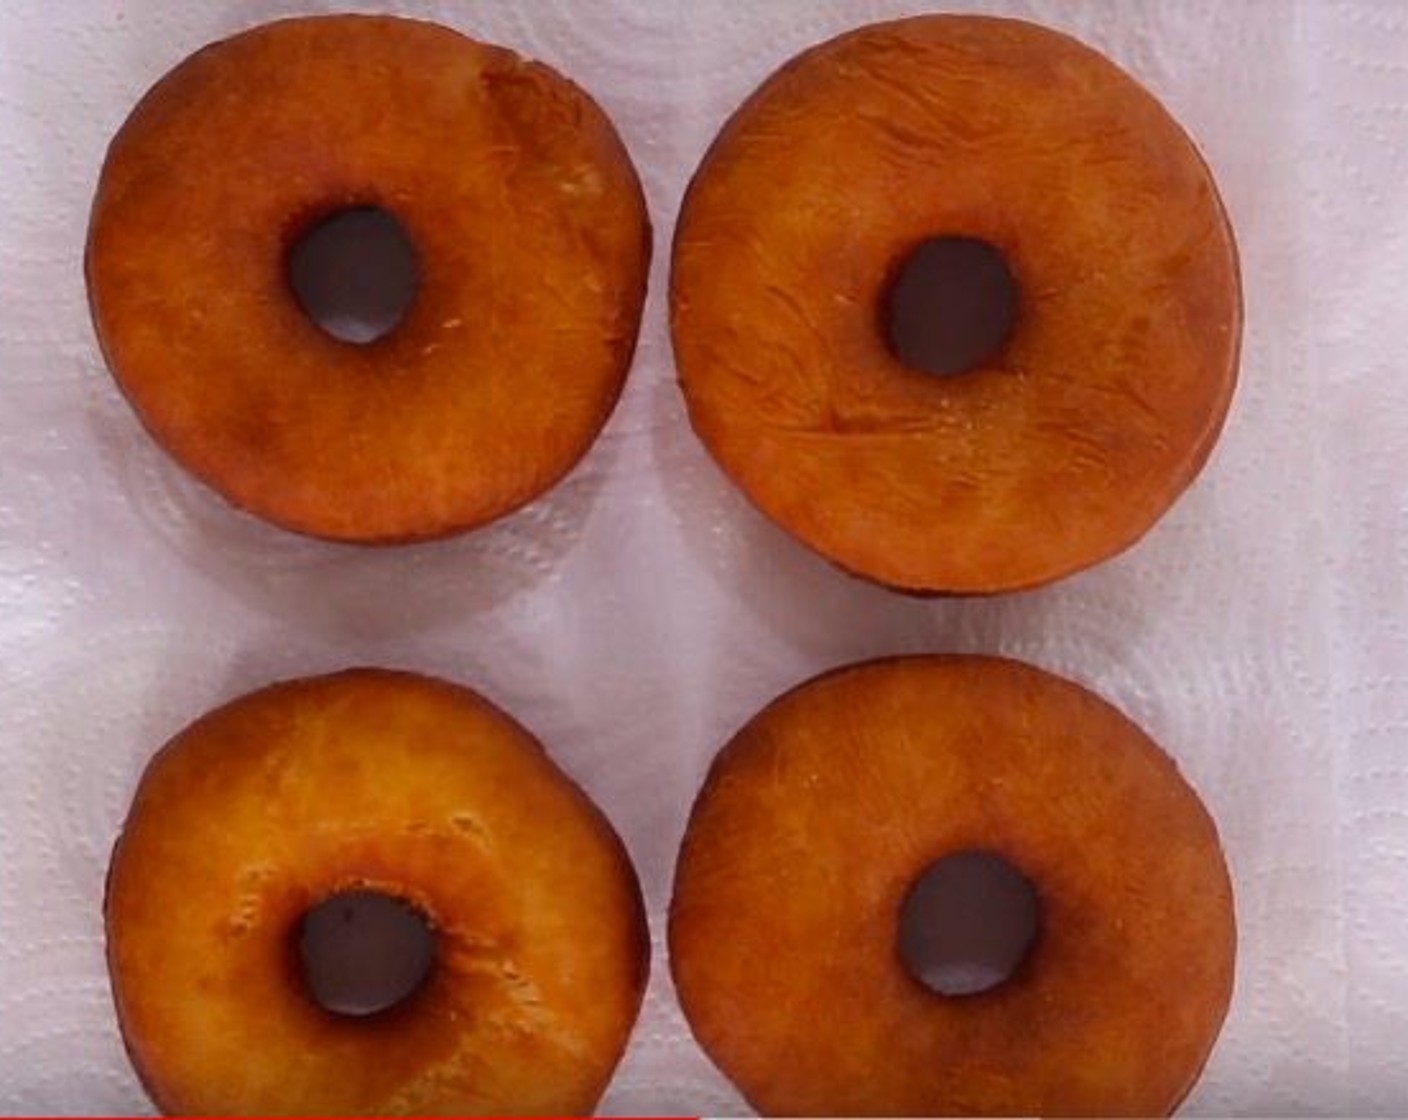 step 8 Place the donuts in batches to fry for 3-4 minutes, turning occasionally. Drain on paper towels as finished.